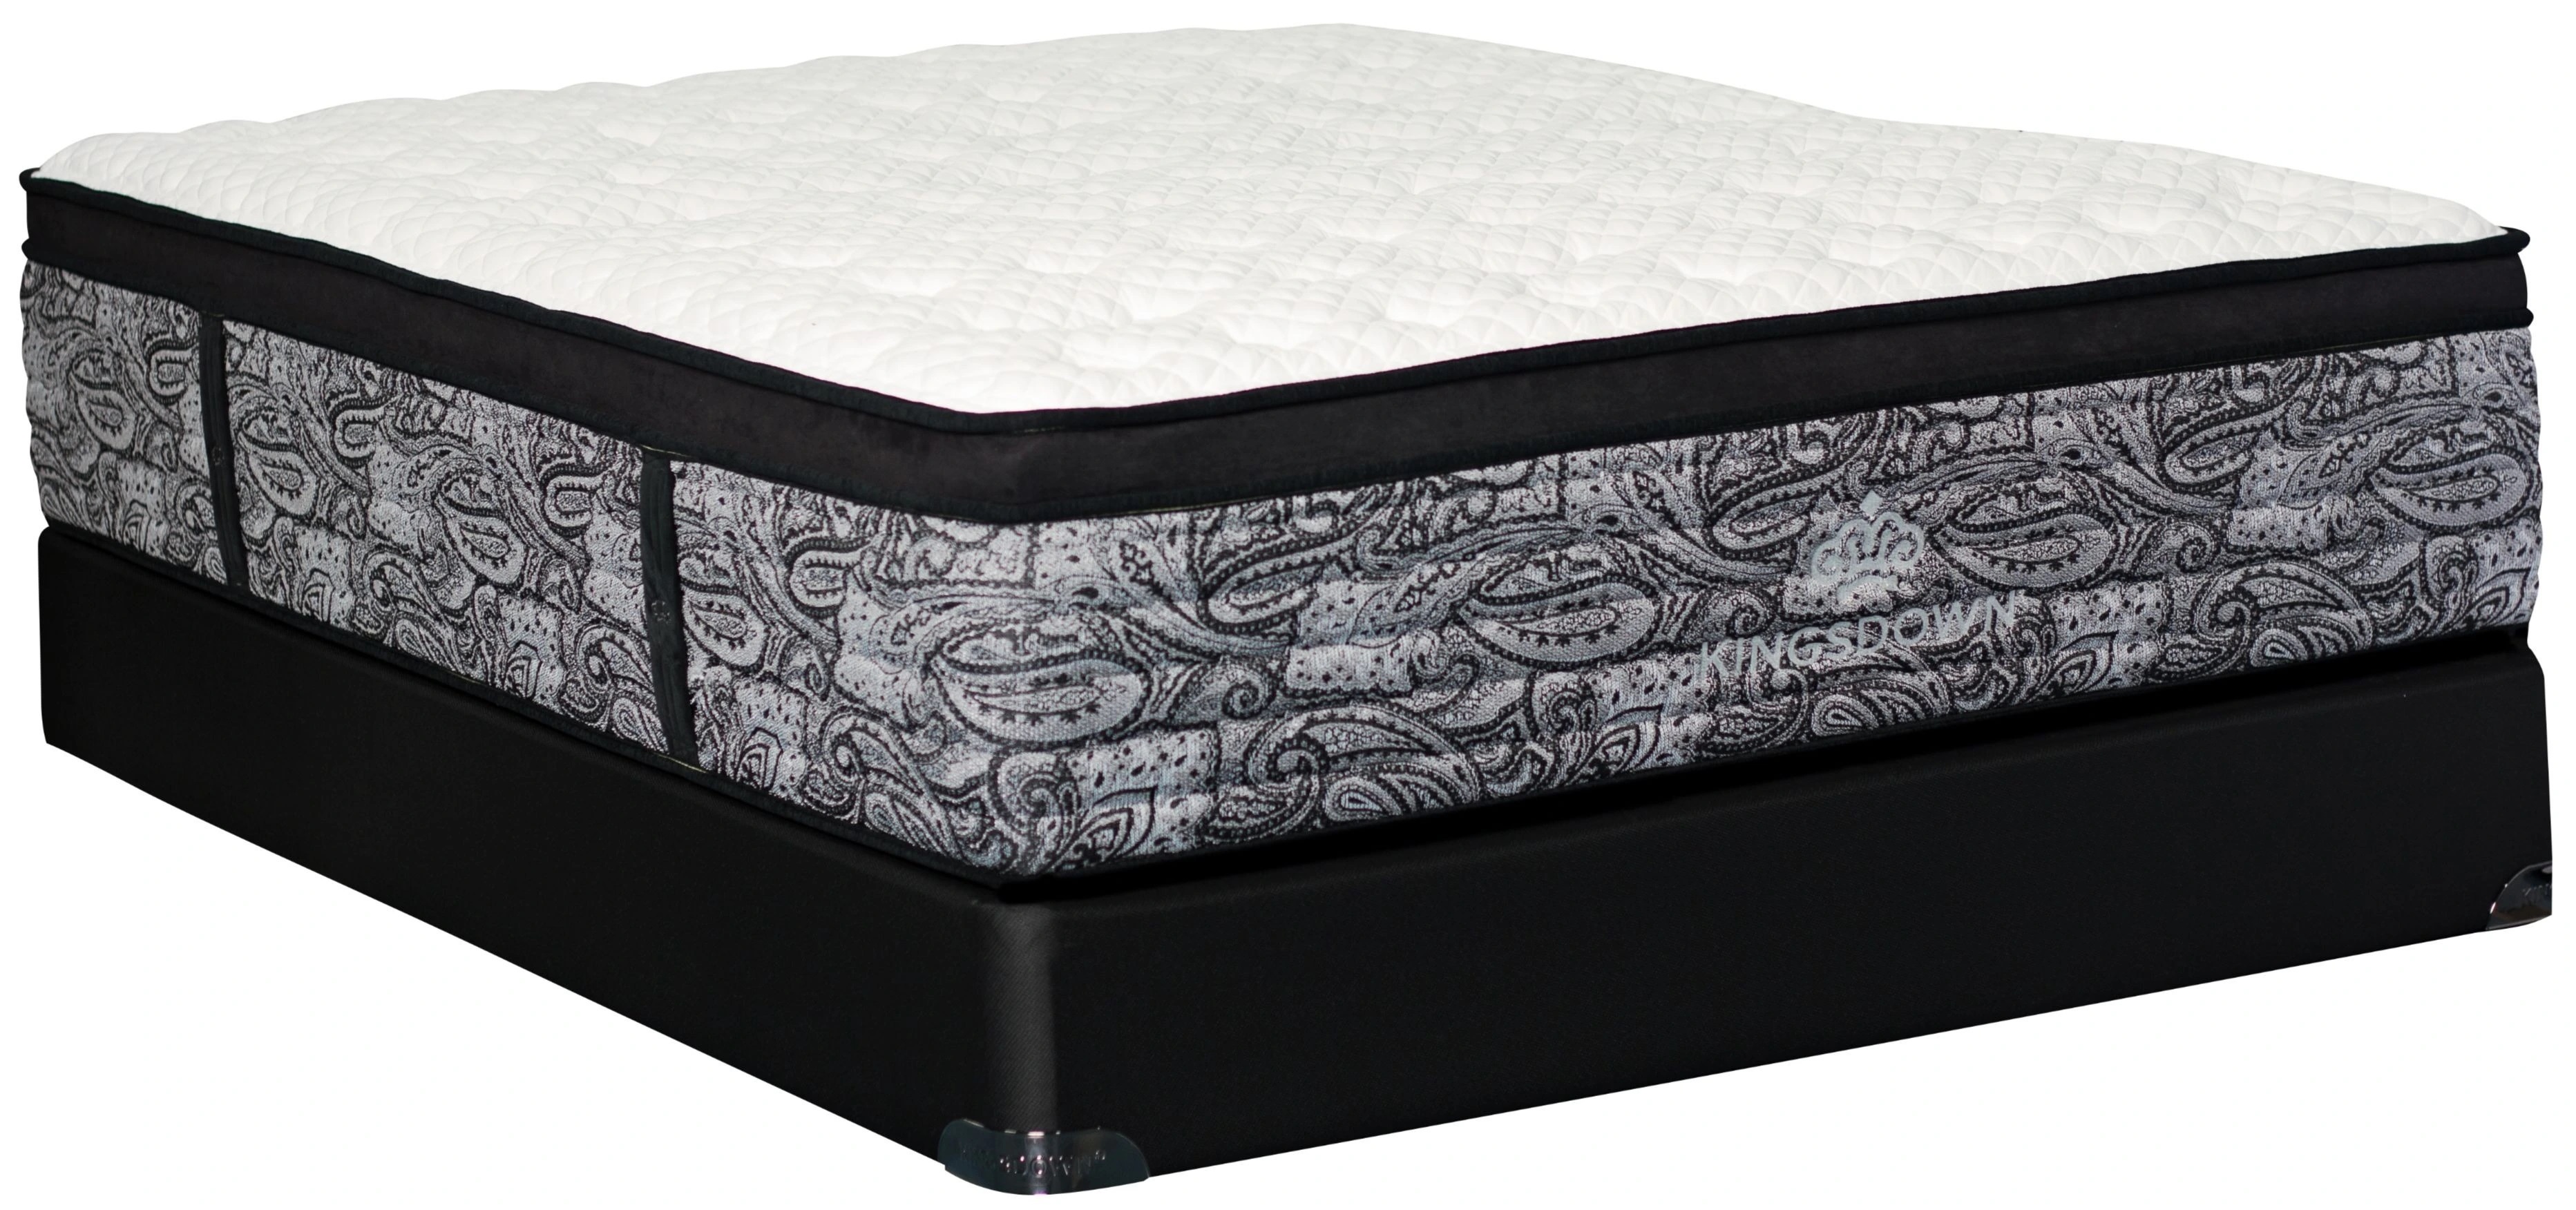 Side view of Kingsdown Crown Imperial Empire queen-size best Euro top mattress 